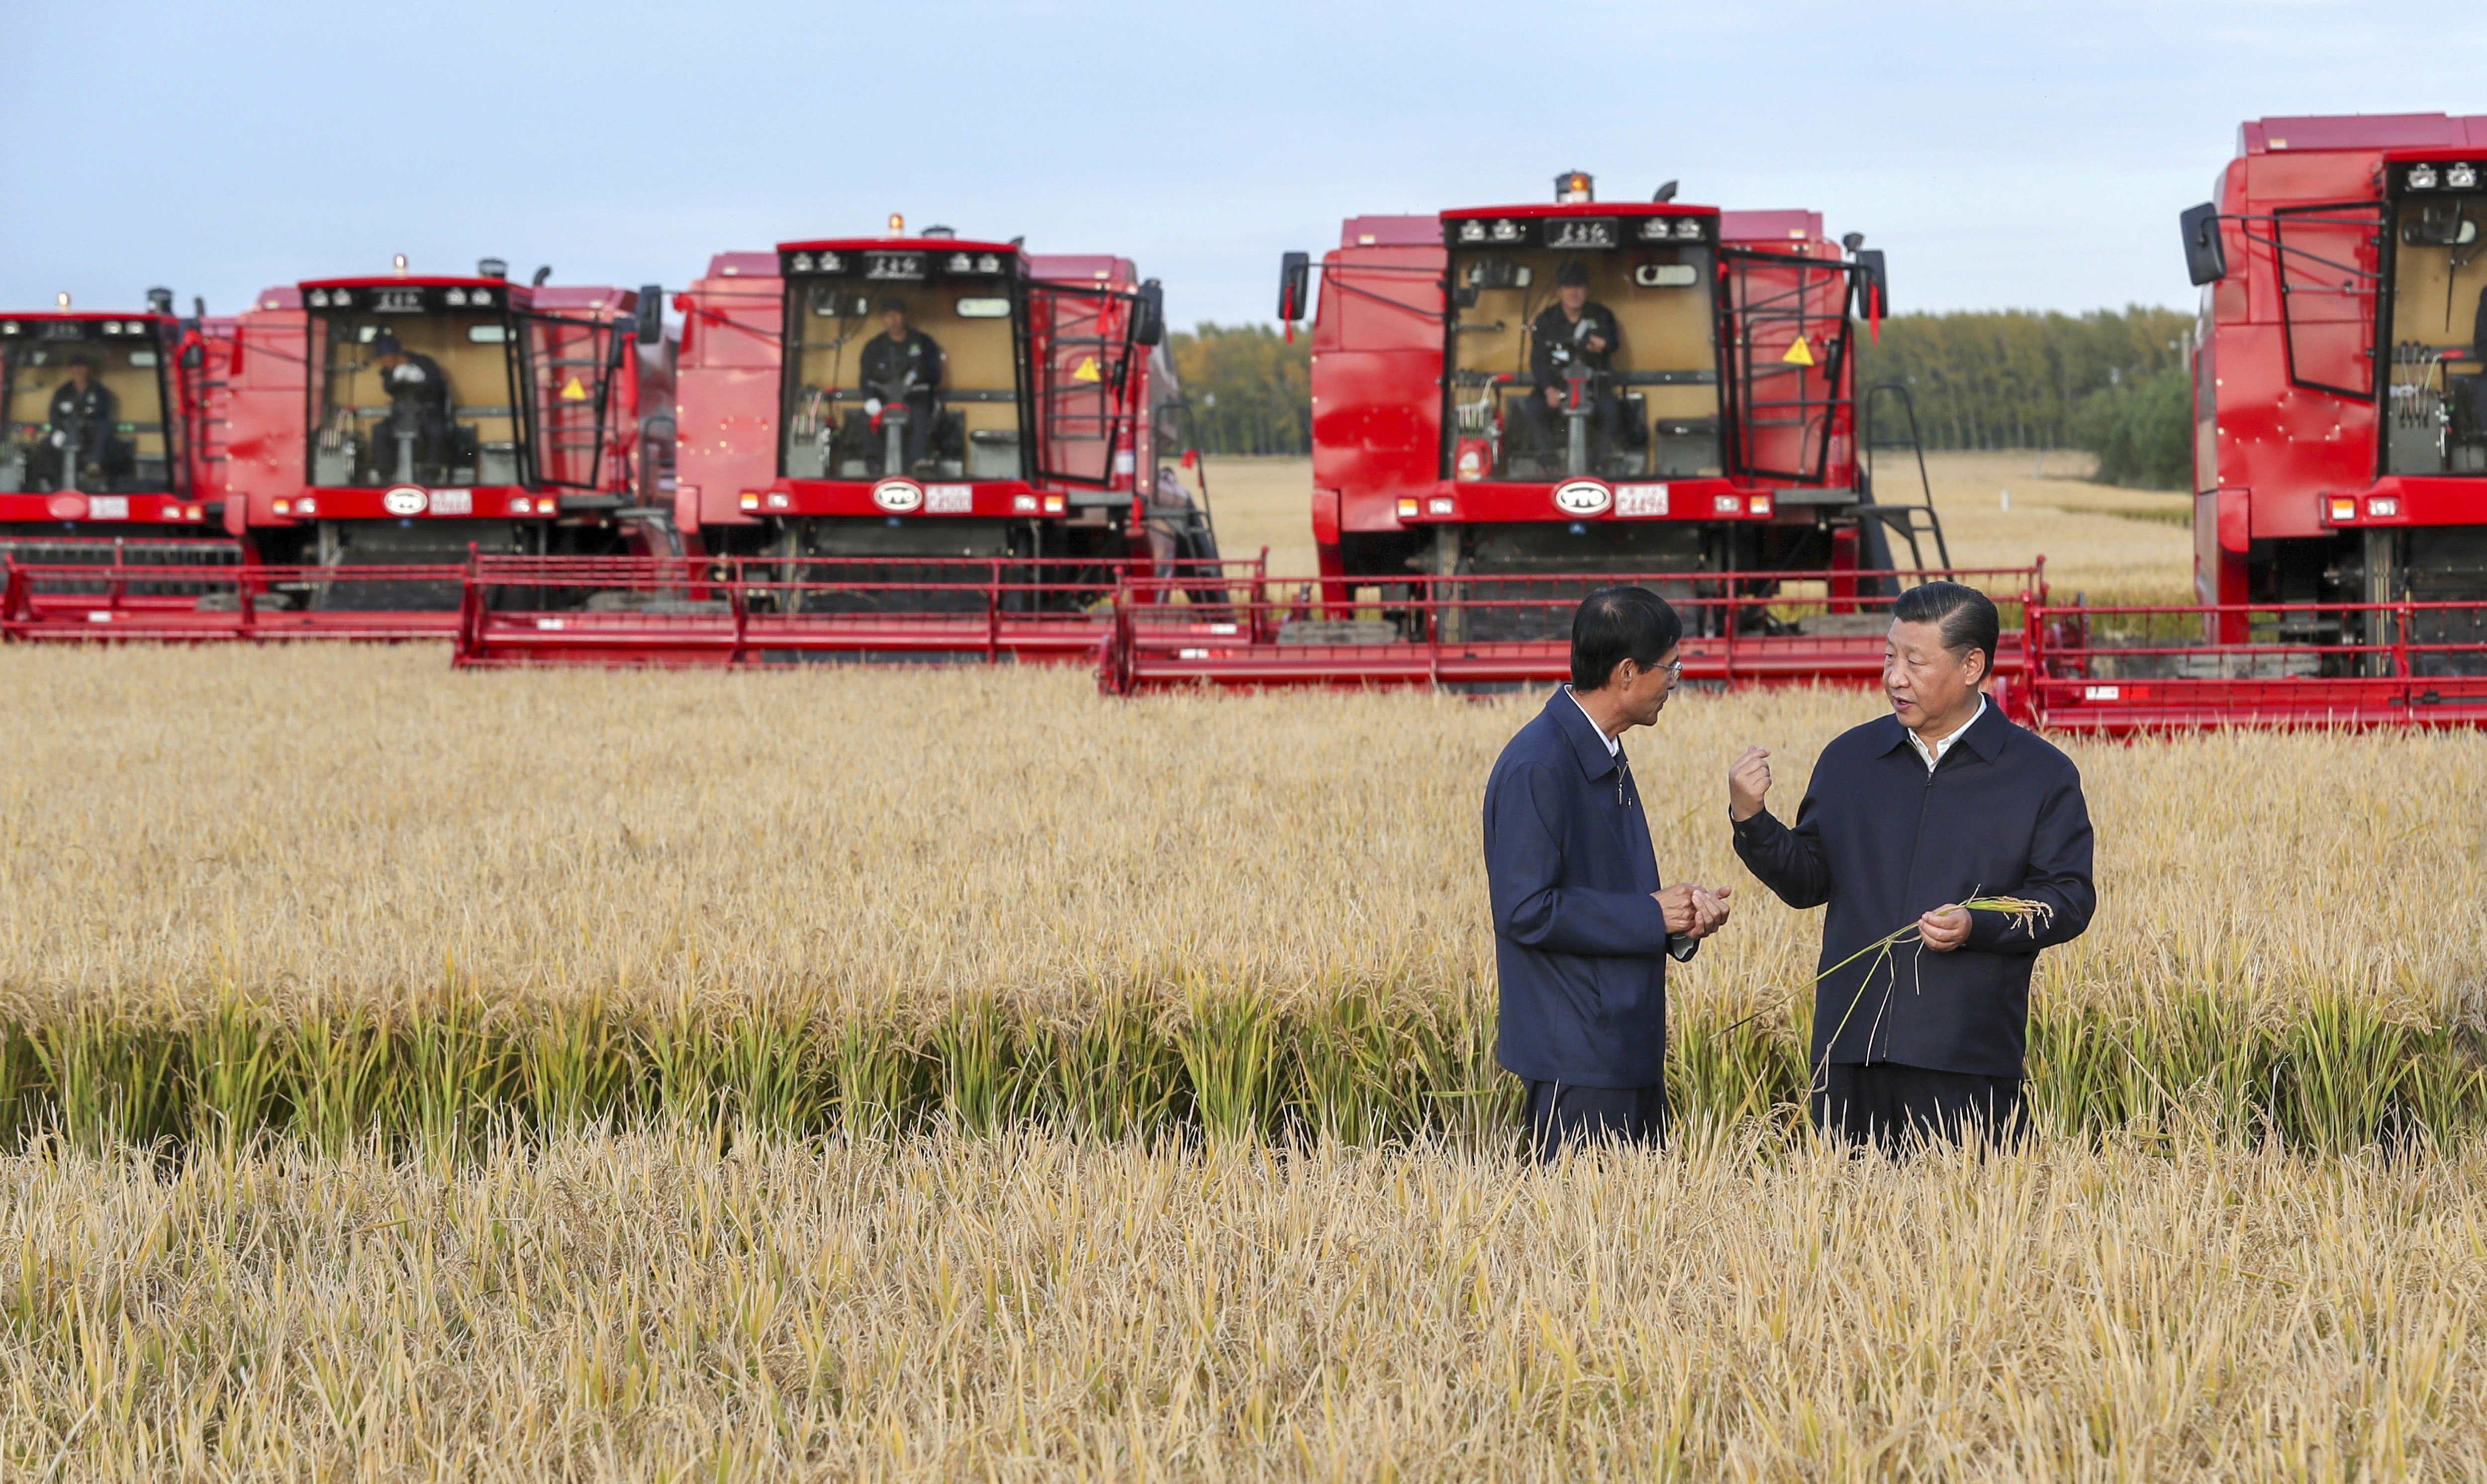 Chinese President Xi Jinping, right, visits a farm in Jiansanjiang in northeastern China's Heilongjiang province on September 25, 2018. Xi was on an inspection tour of the region as China has slapped tariffs on US agricultural imports and looked to increase farming self-sufficiency amid a growing trade war with the United States. Photo: Xinhua